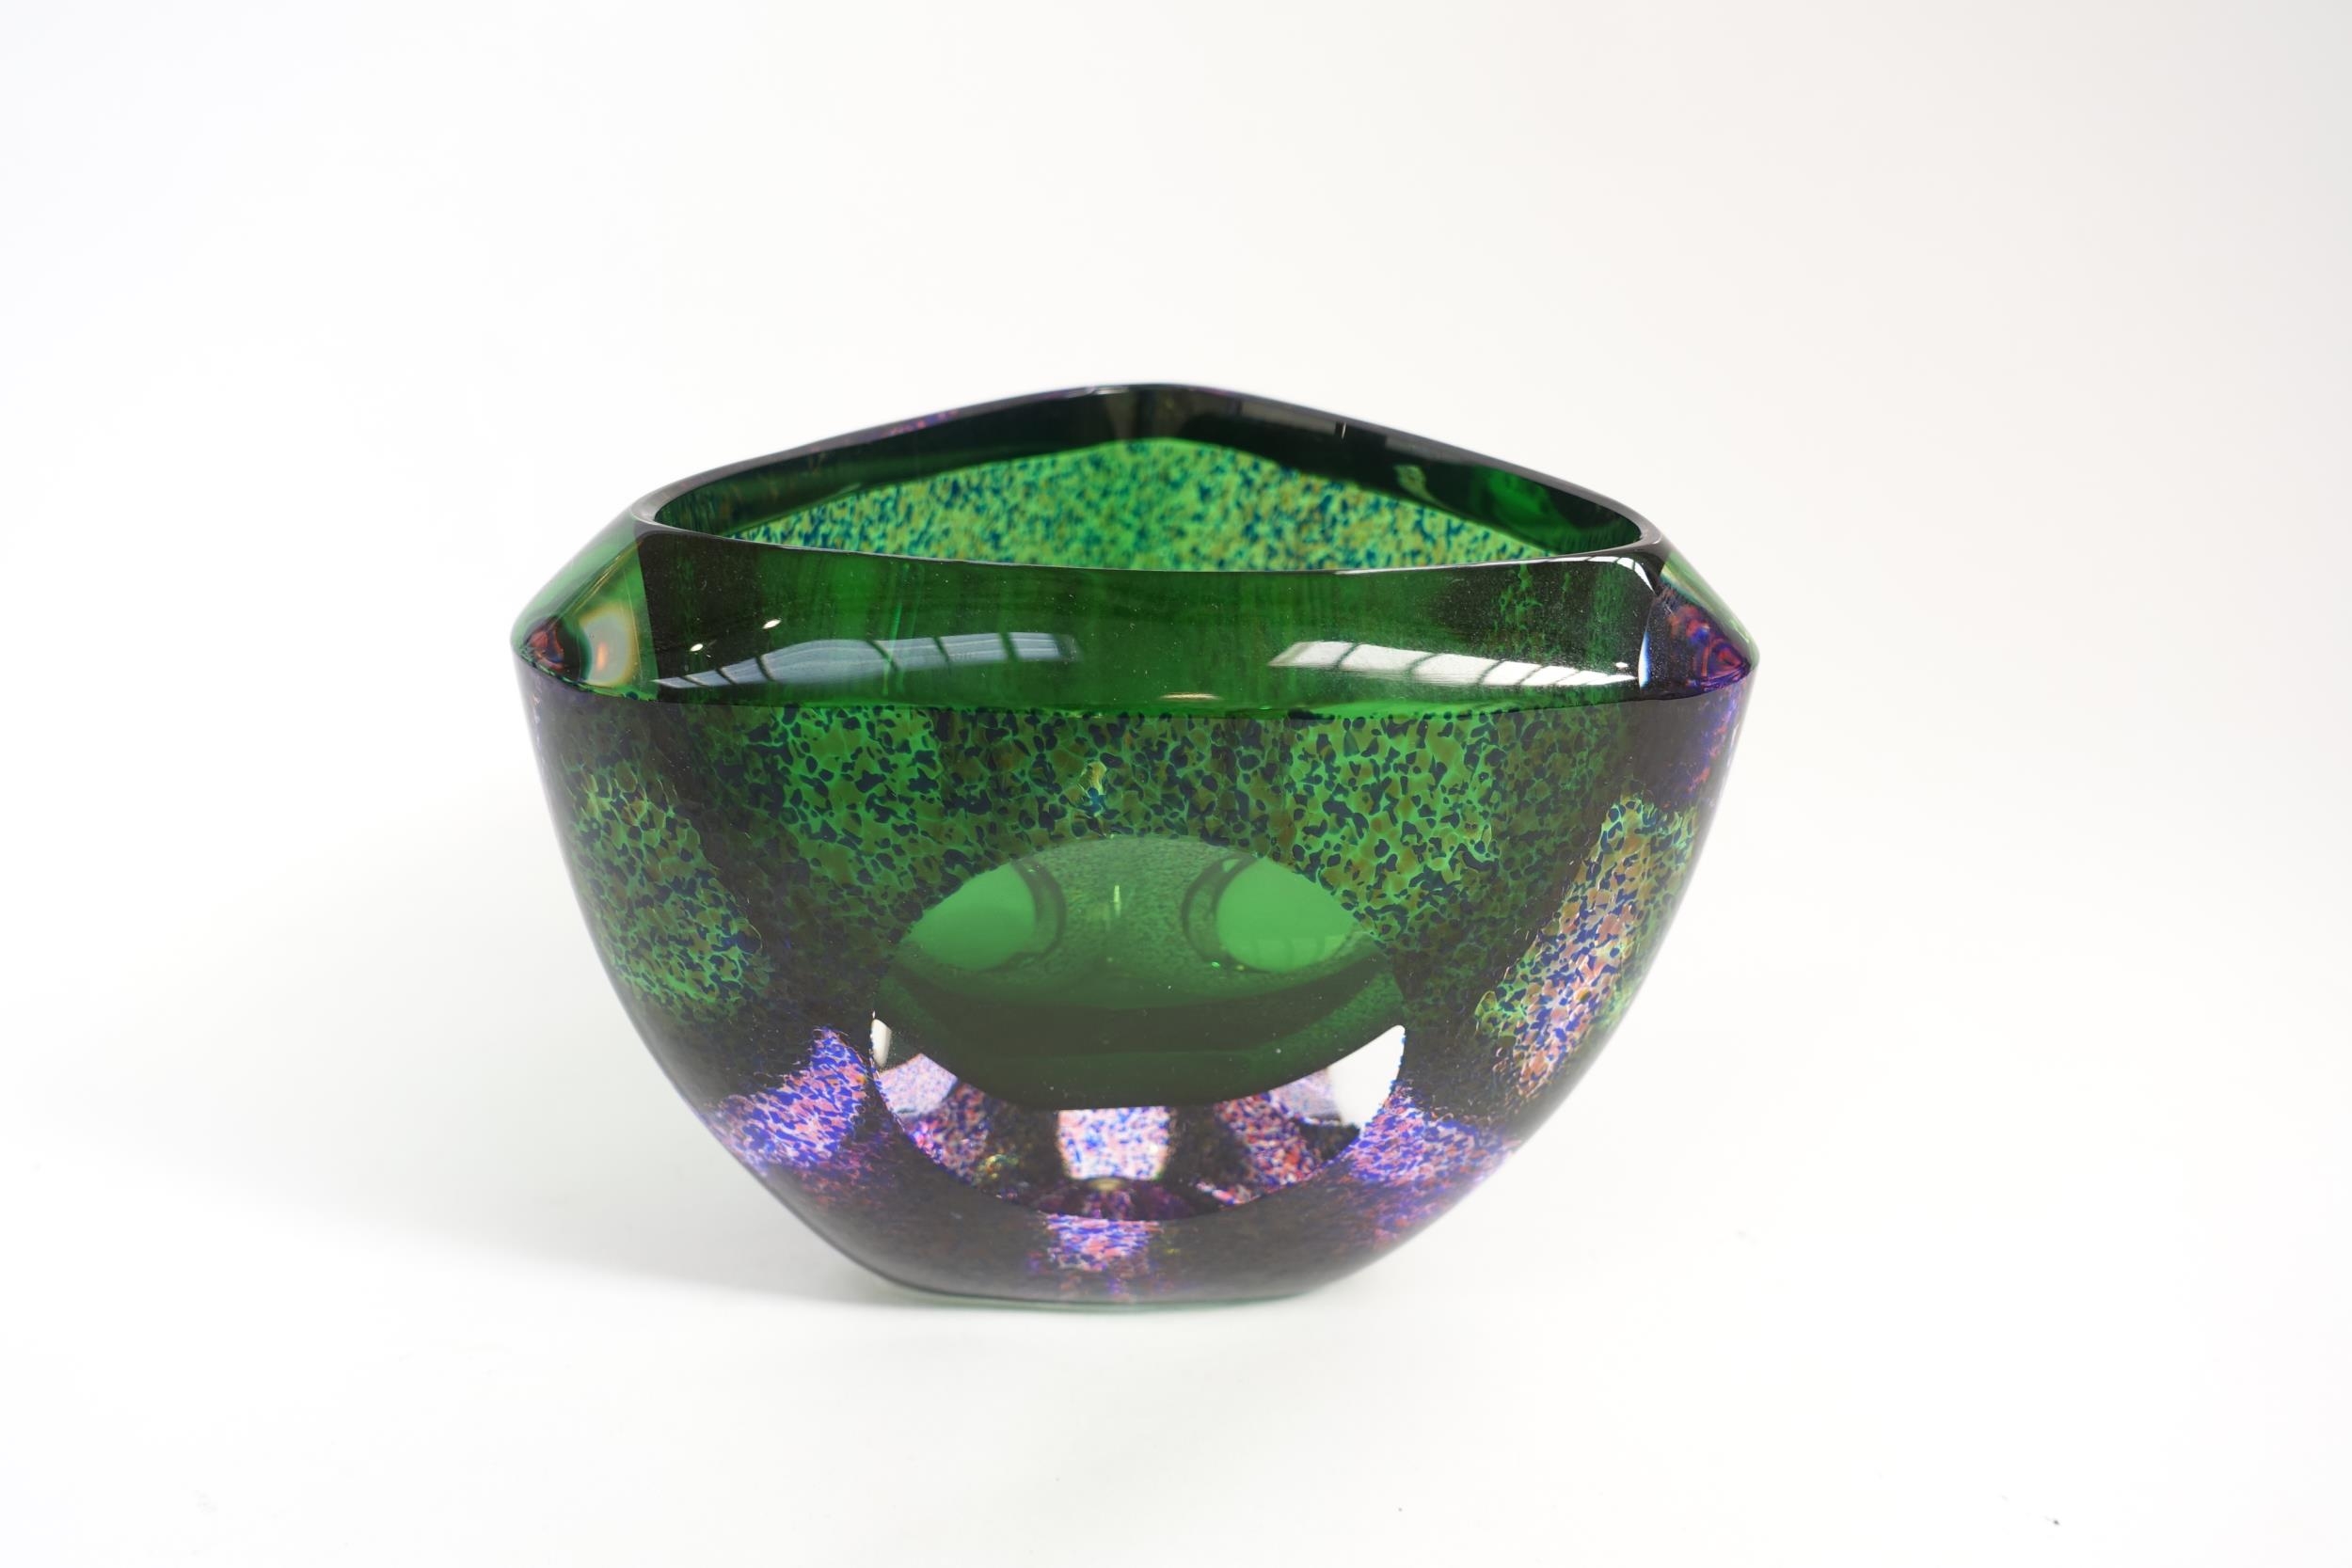 An Orrefors glass bowl designed by Erika Lagerbielke in green with mottled blue and amethyst